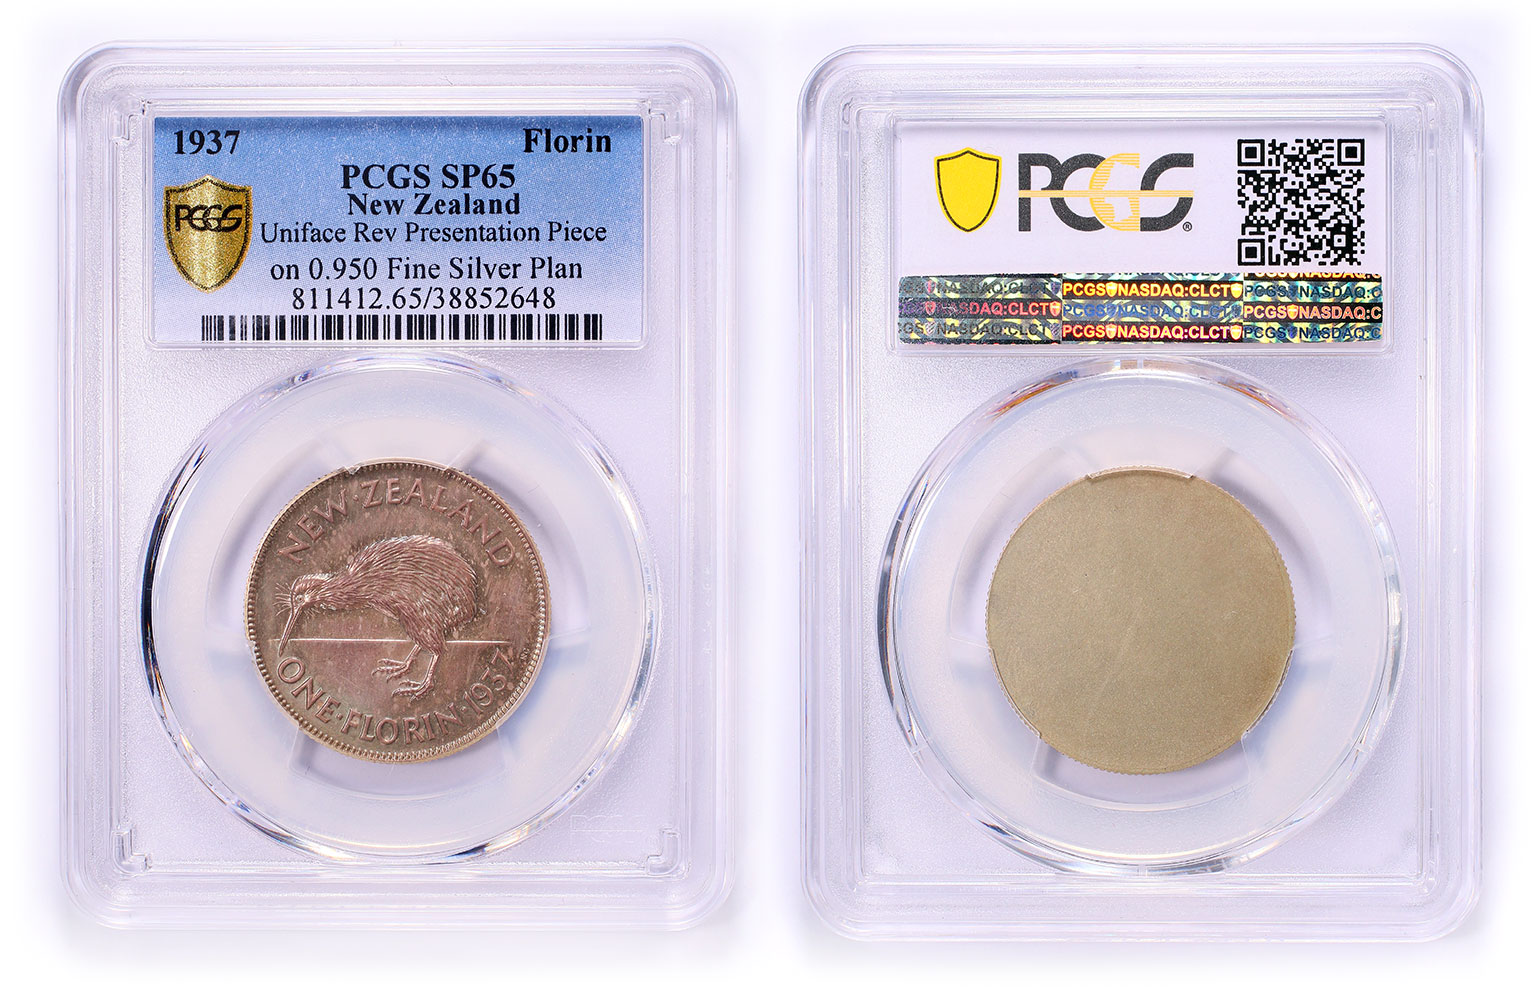 PCGS Certifies Coins Struck for Royalty